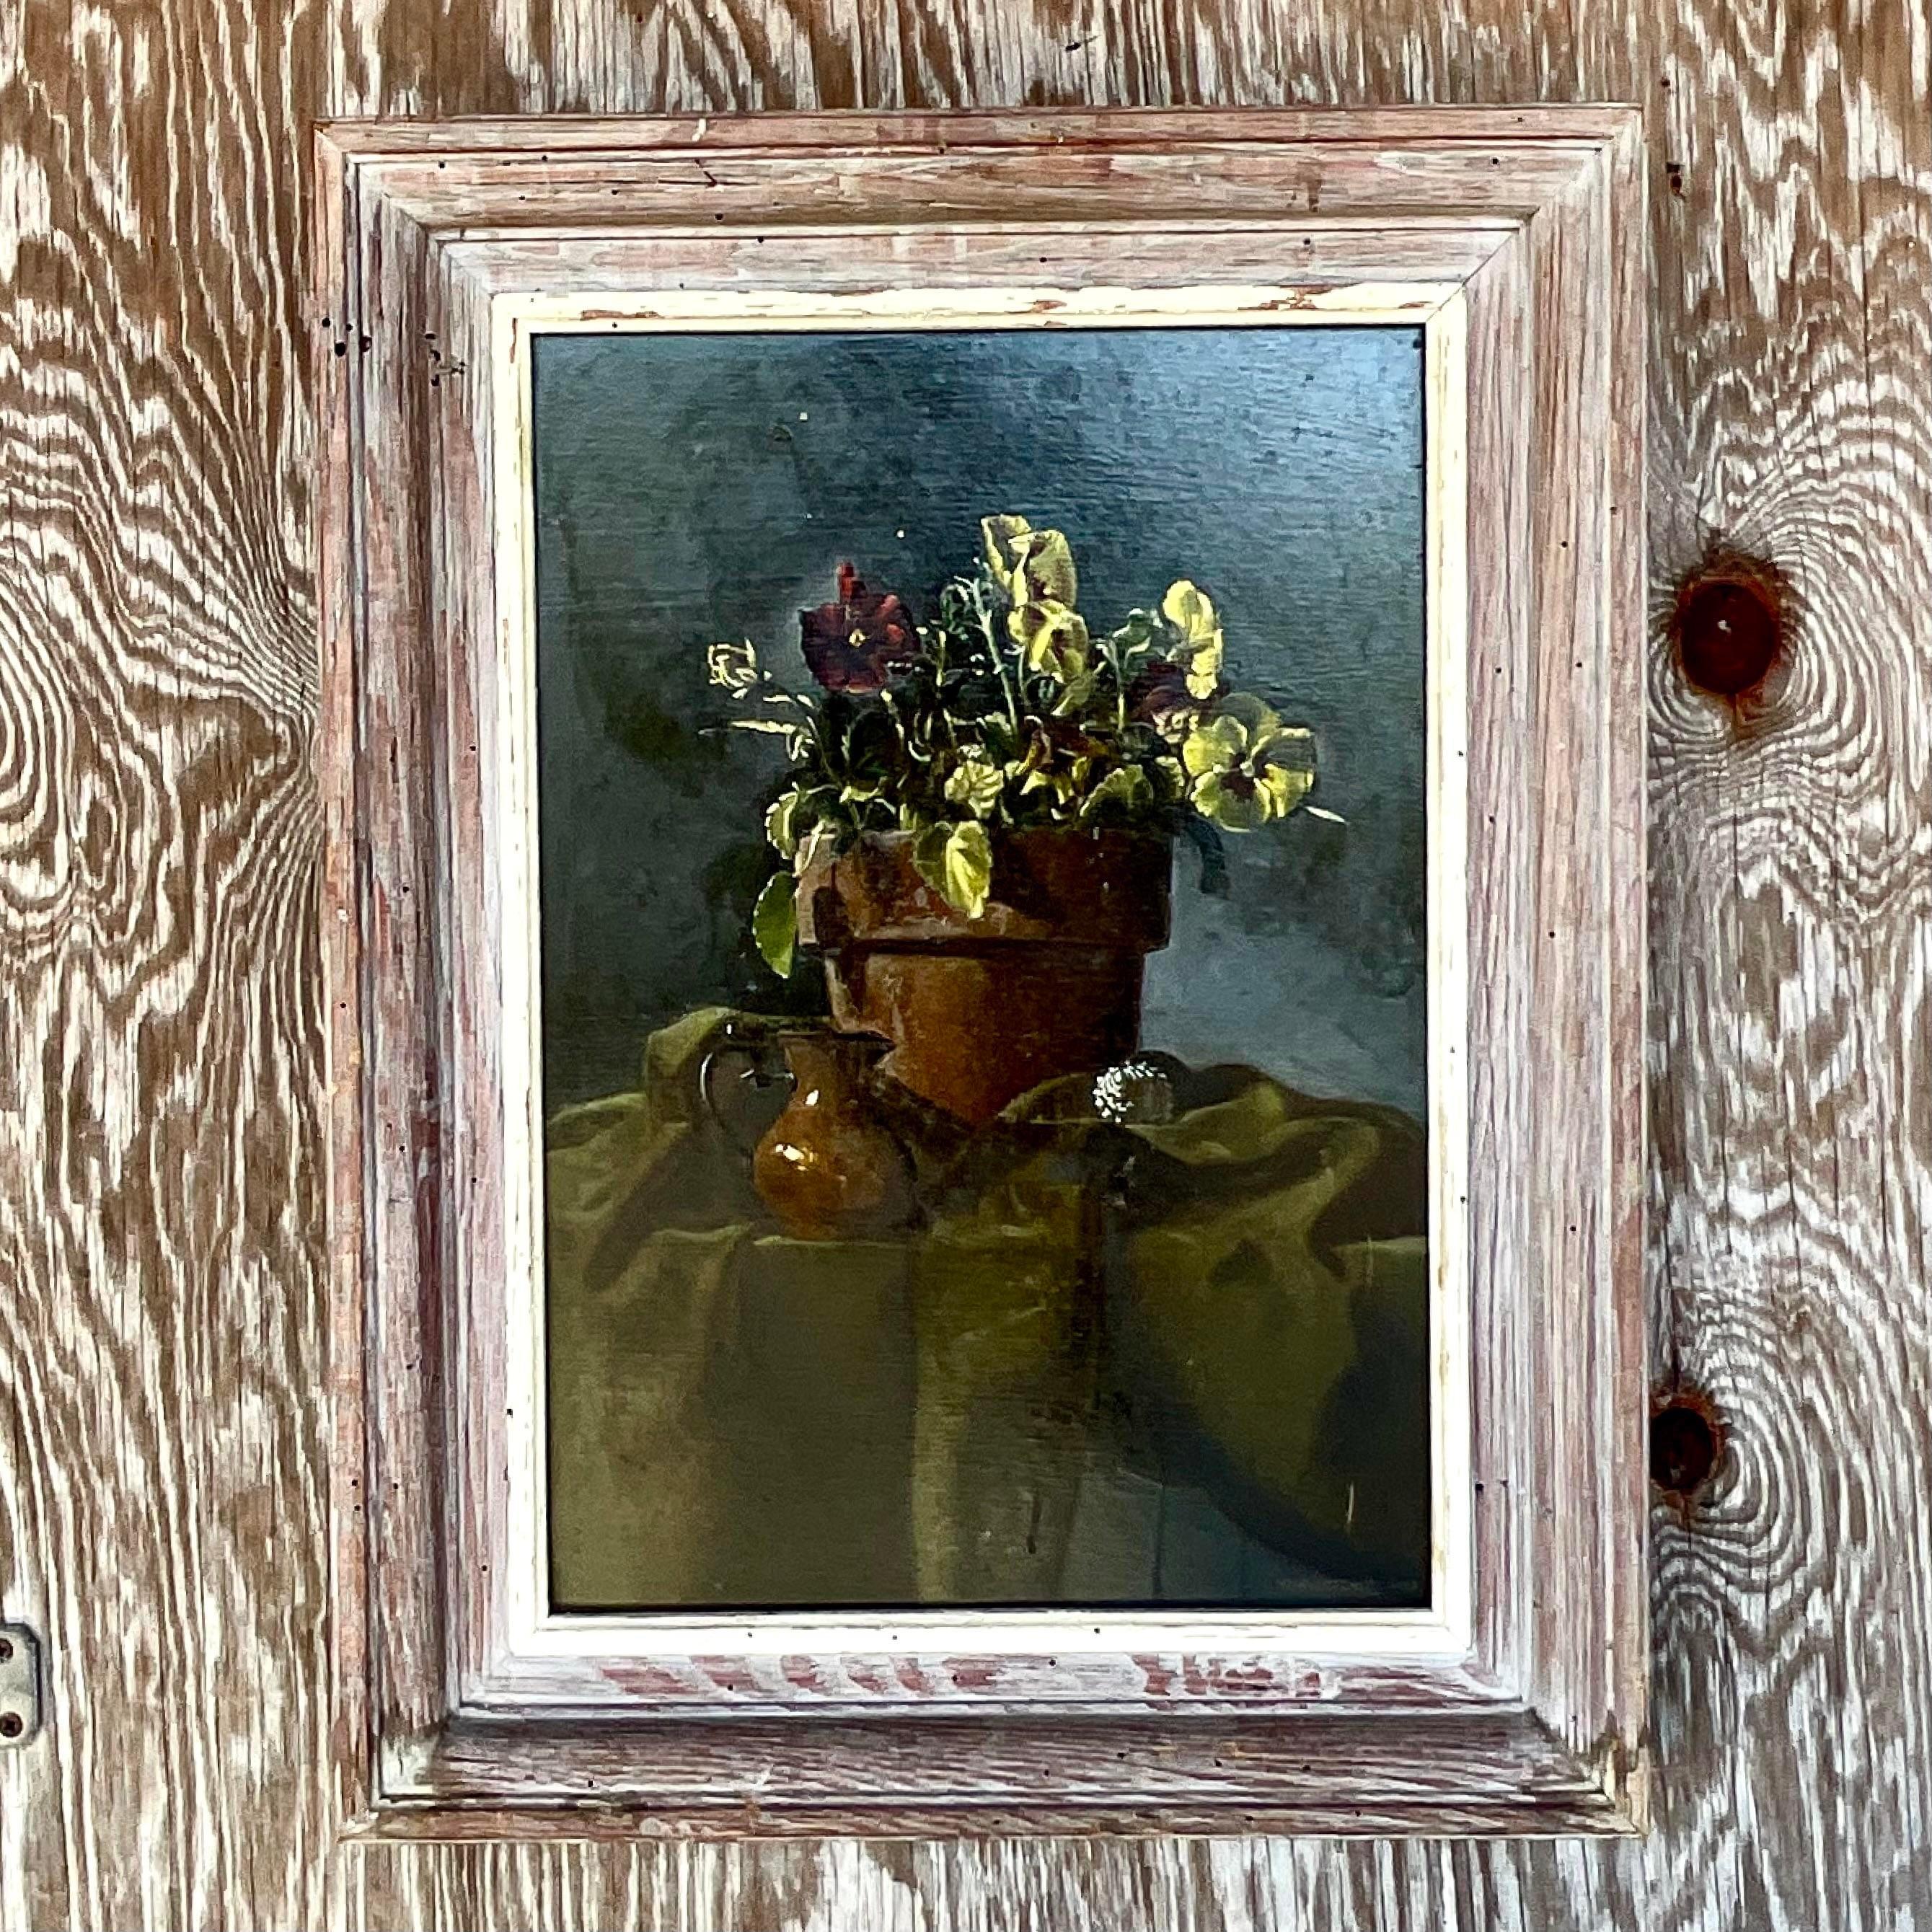 A fabulous vintage Boho original oil on canvas. A chic tabletop still life composition of violets and shells. Signed by the artist. Acquired from a Palm Beach estate.